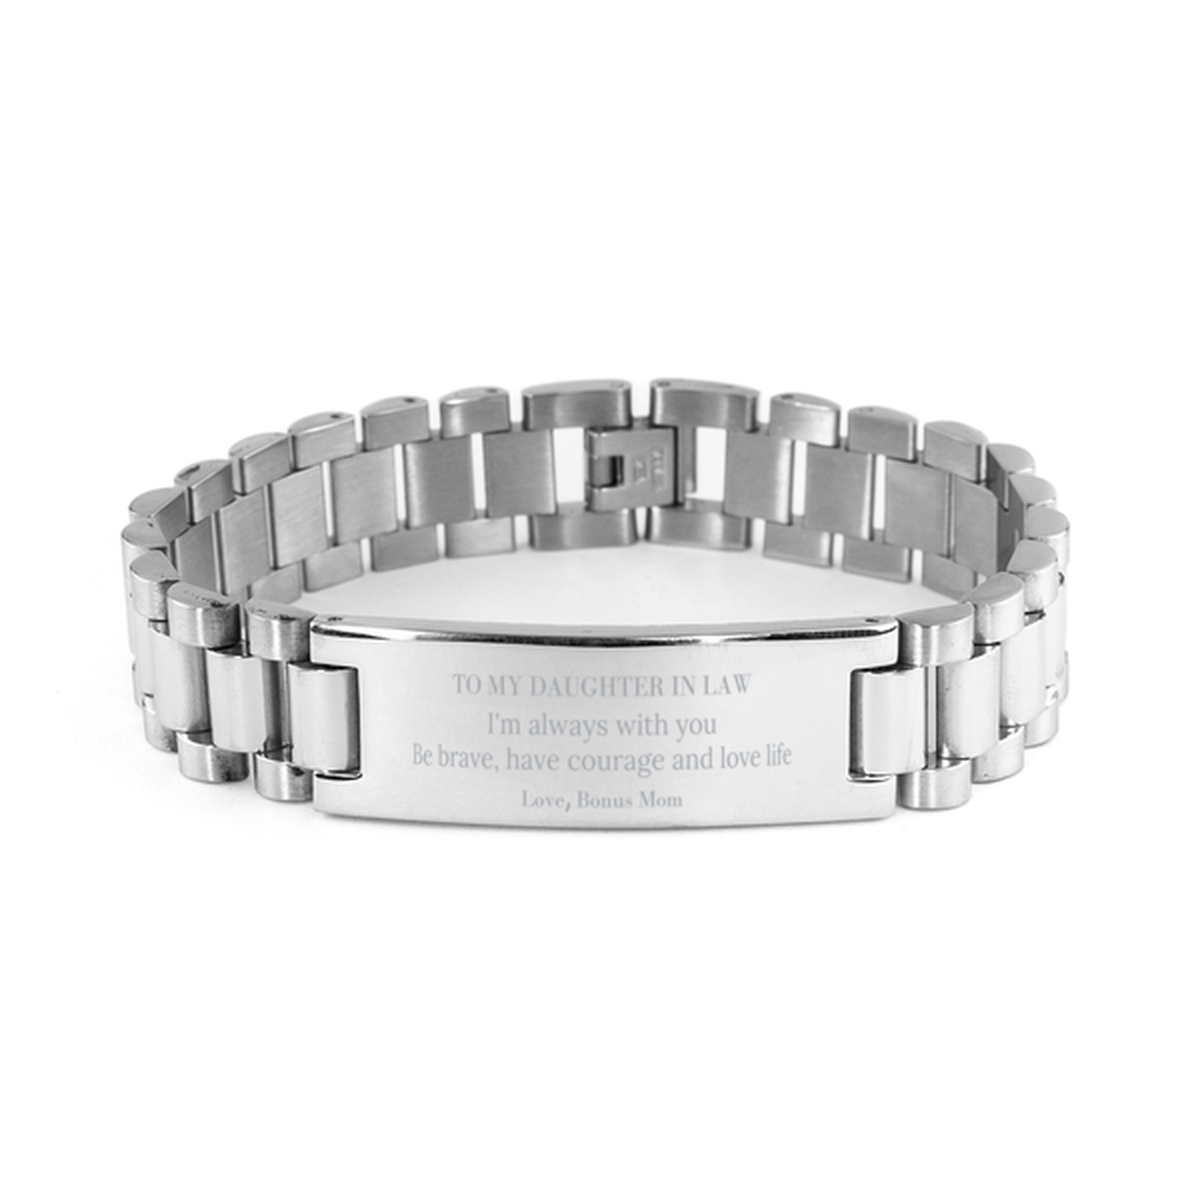 To My Daughter In Law Gifts from Bonus Mom, Unique Ladder Stainless Steel Bracelet Inspirational Christmas Birthday Graduation Gifts for Daughter In Law I'm always with you. Be brave, have courage and love life. Love, Bonus Mom